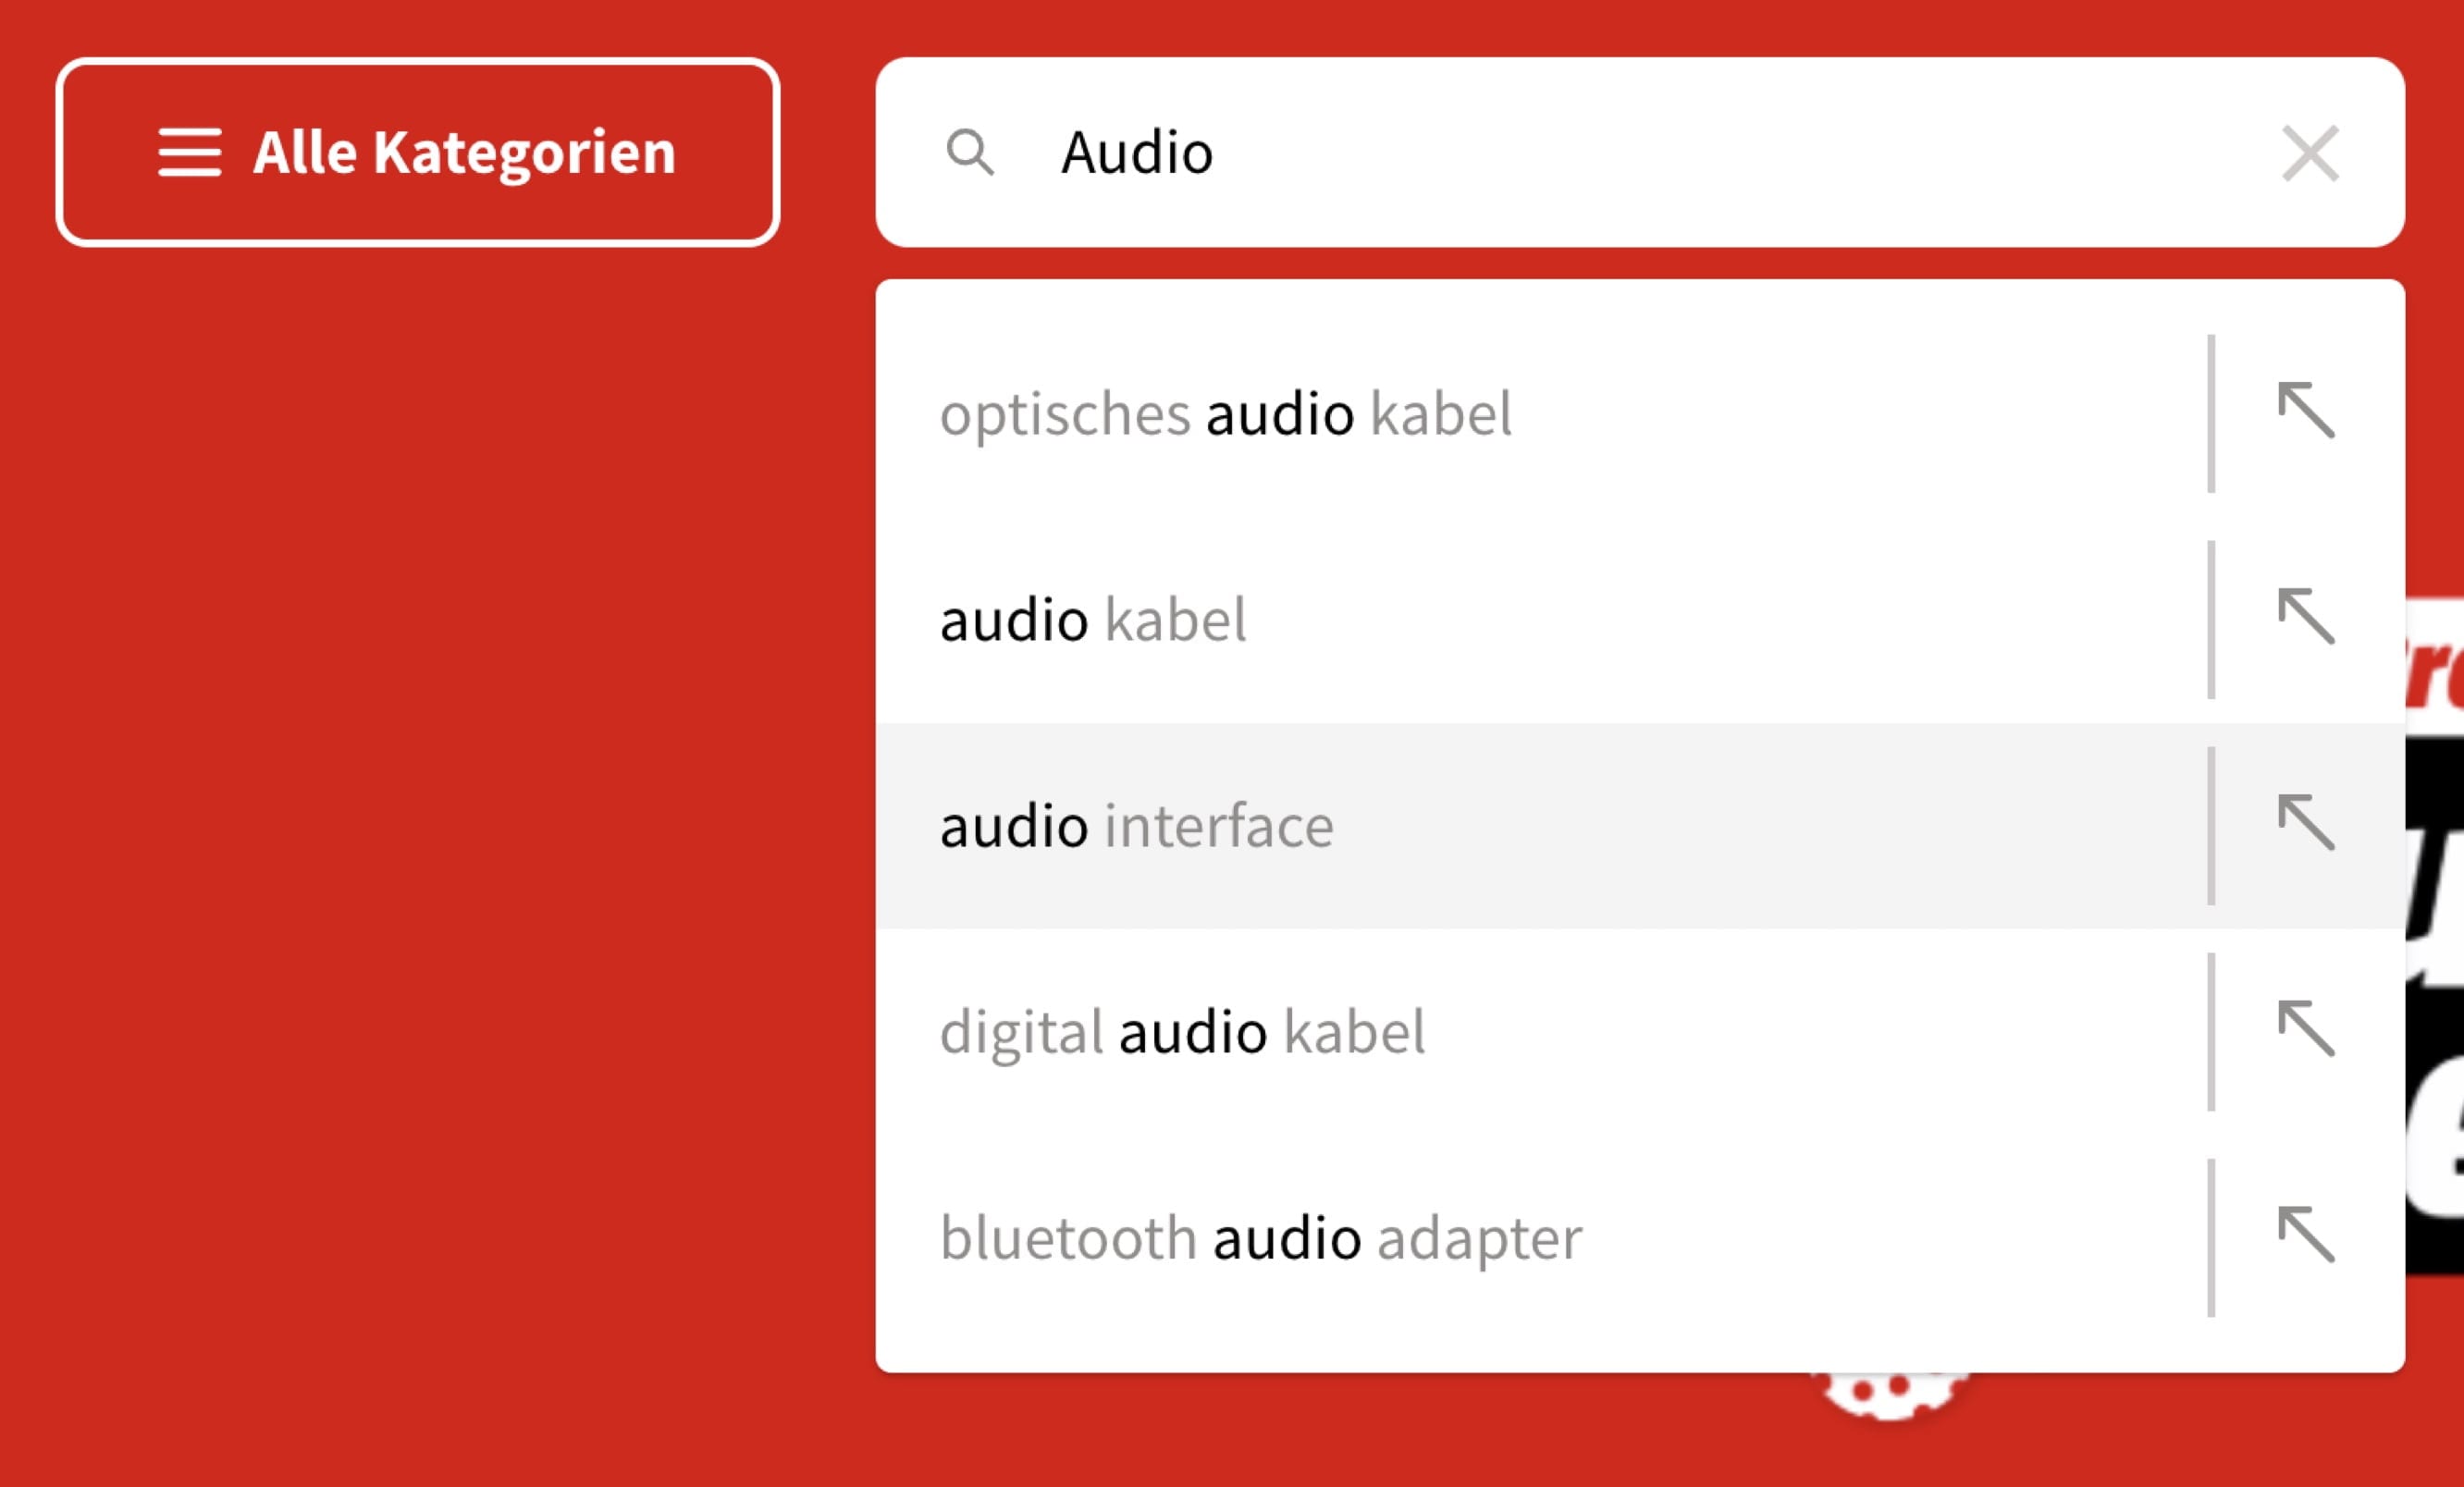 One of the many: autocomplete suggestions by Mediamarkt, a German eCommerce retailer.